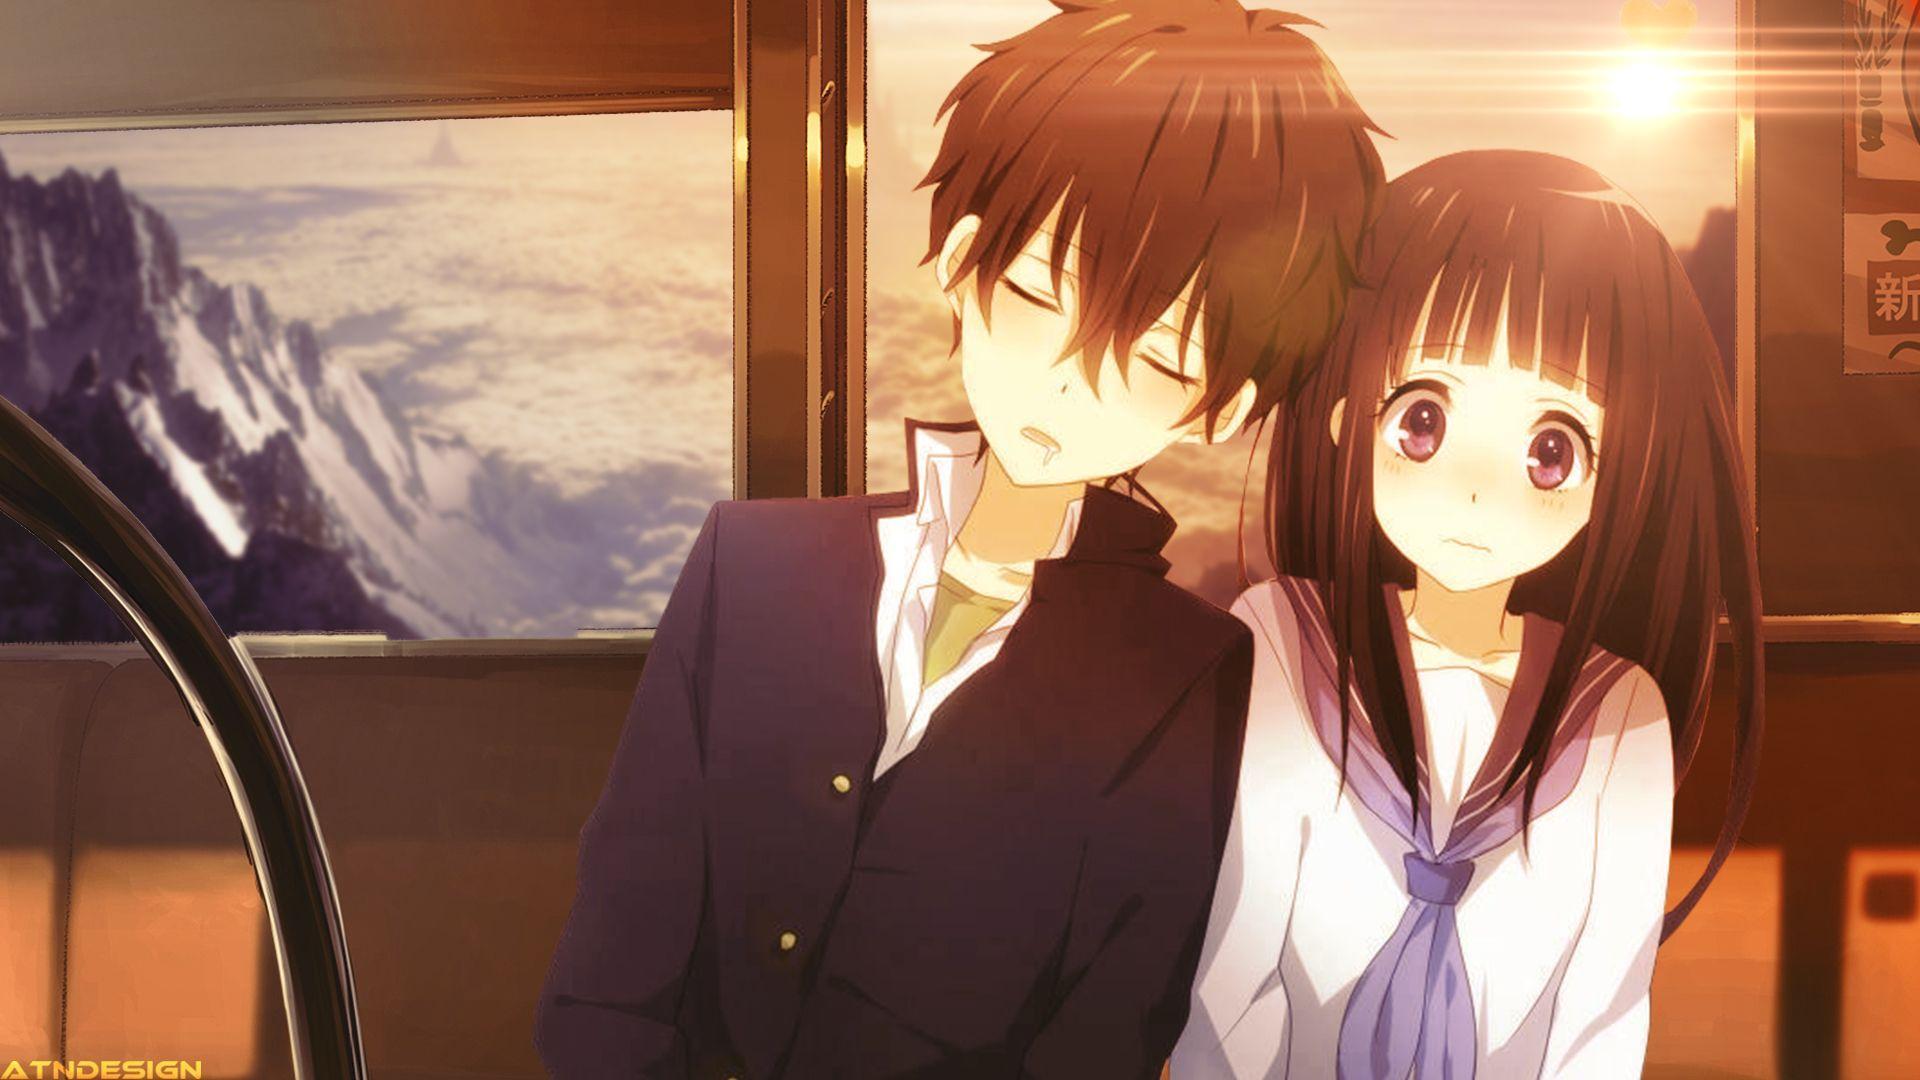 Cute Anime Couples Wallpaper Free Cute Anime Couples Background